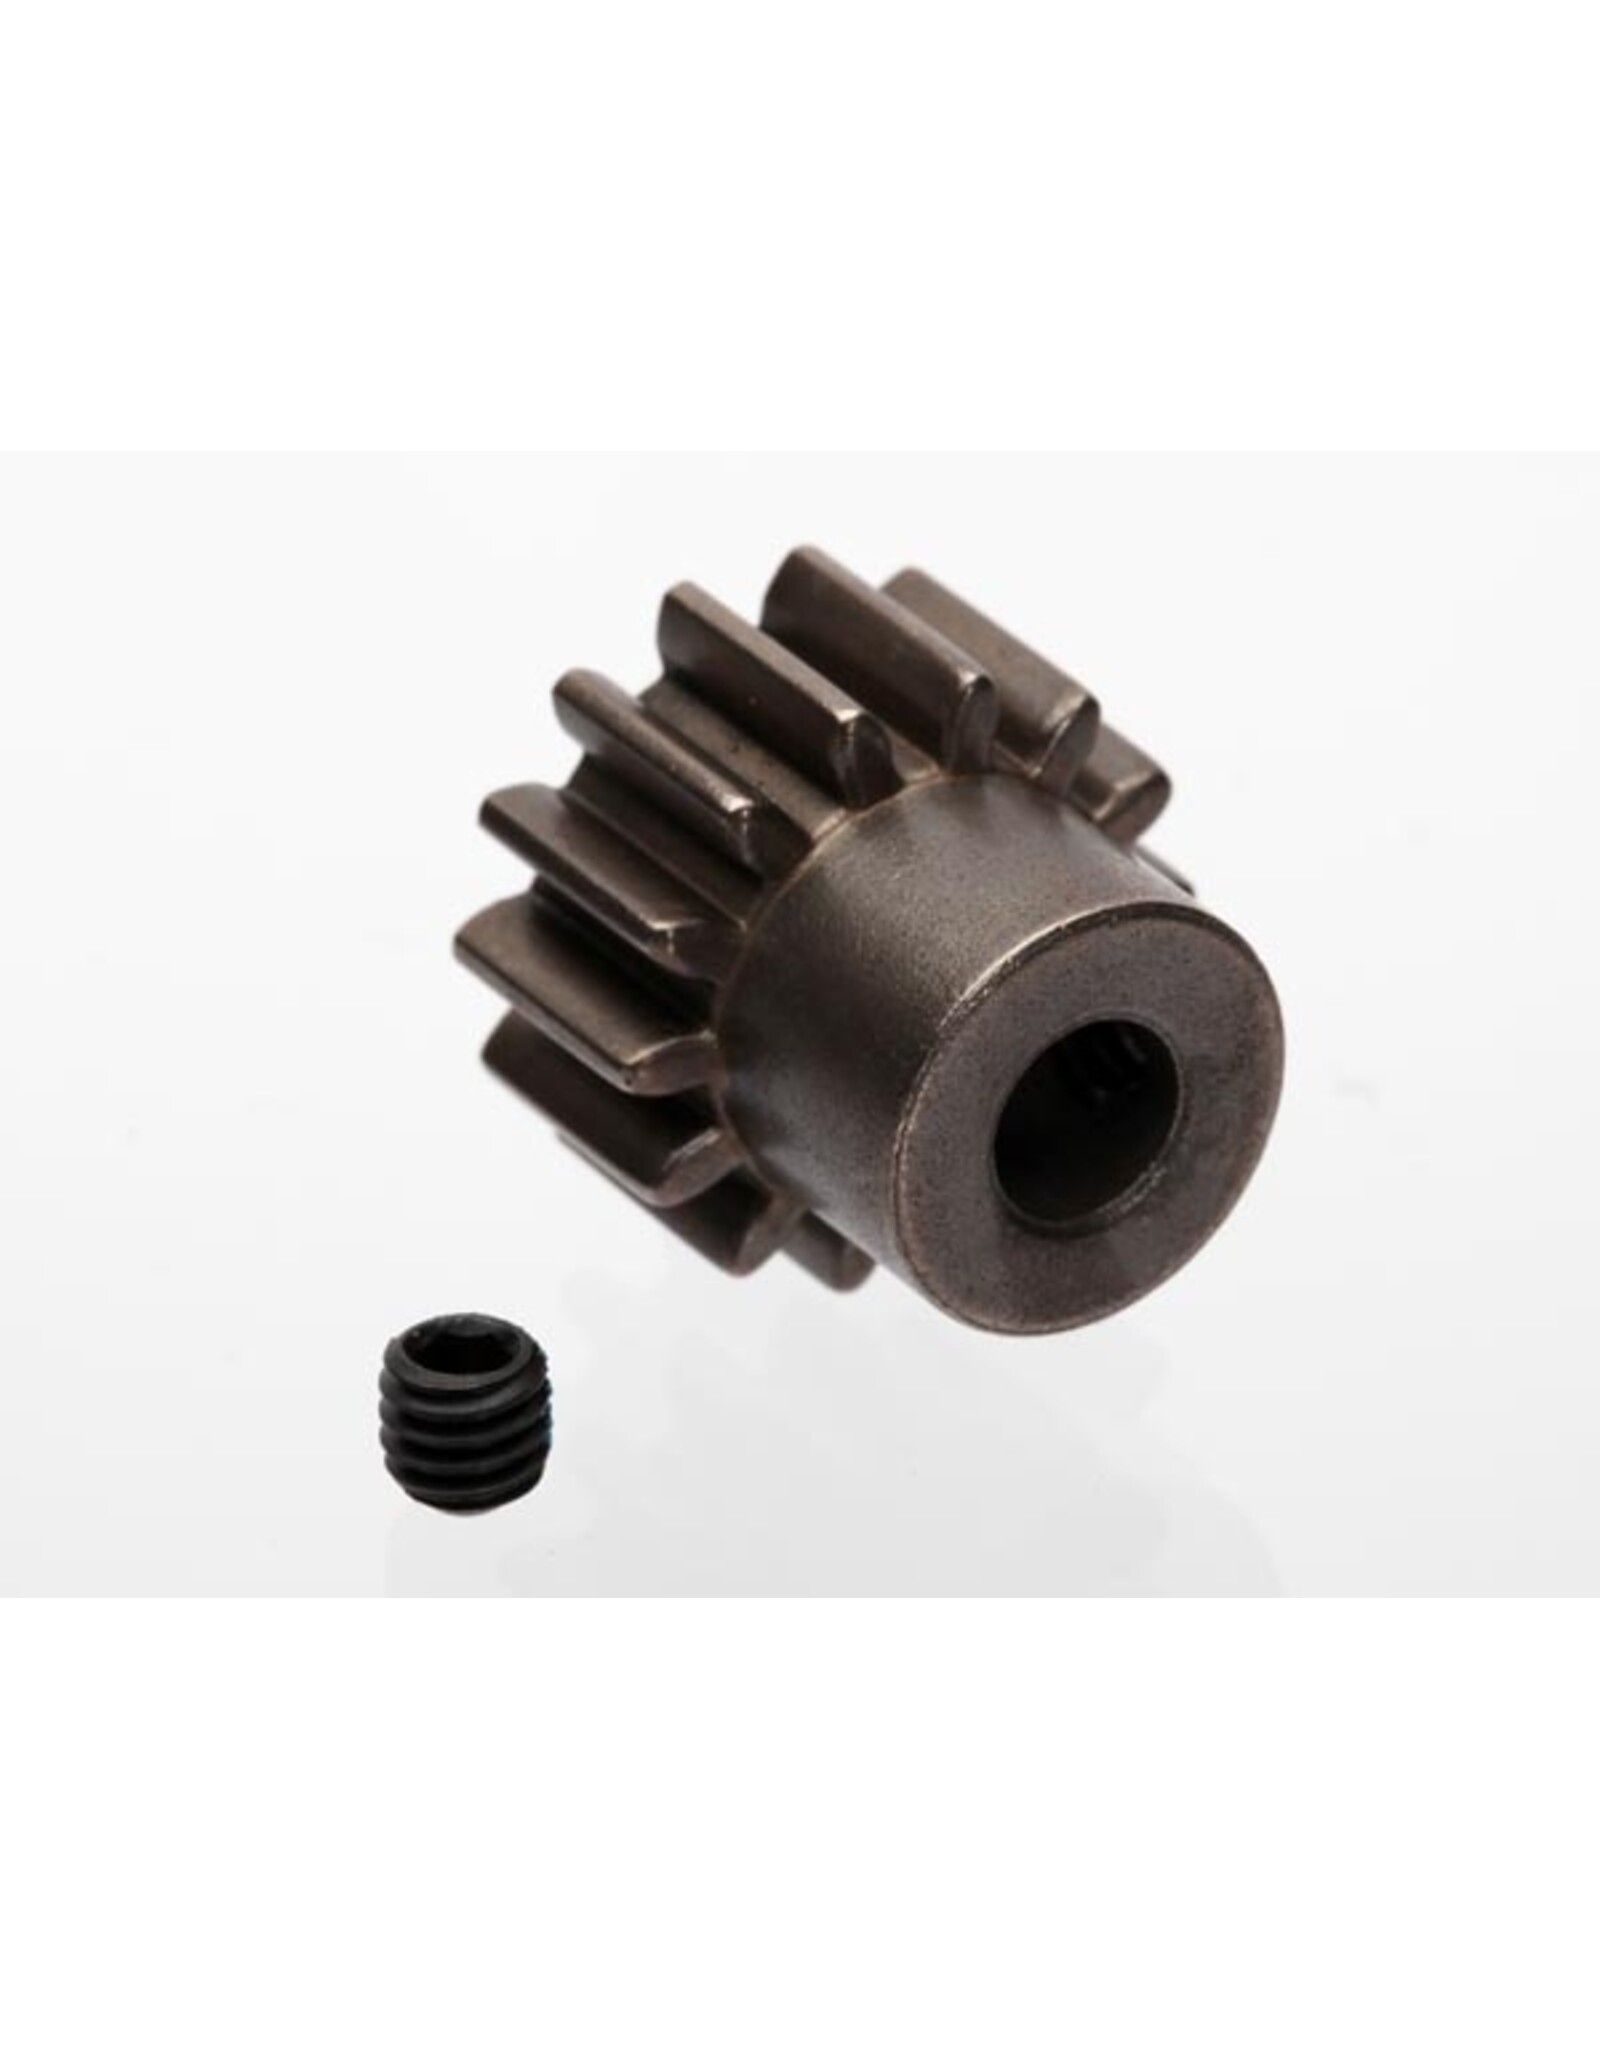 Traxxas Gear, 14-T pinion (1.0 metric pitch) (fits 5mm shaft)/ set screw (for use only with steel spur gears)